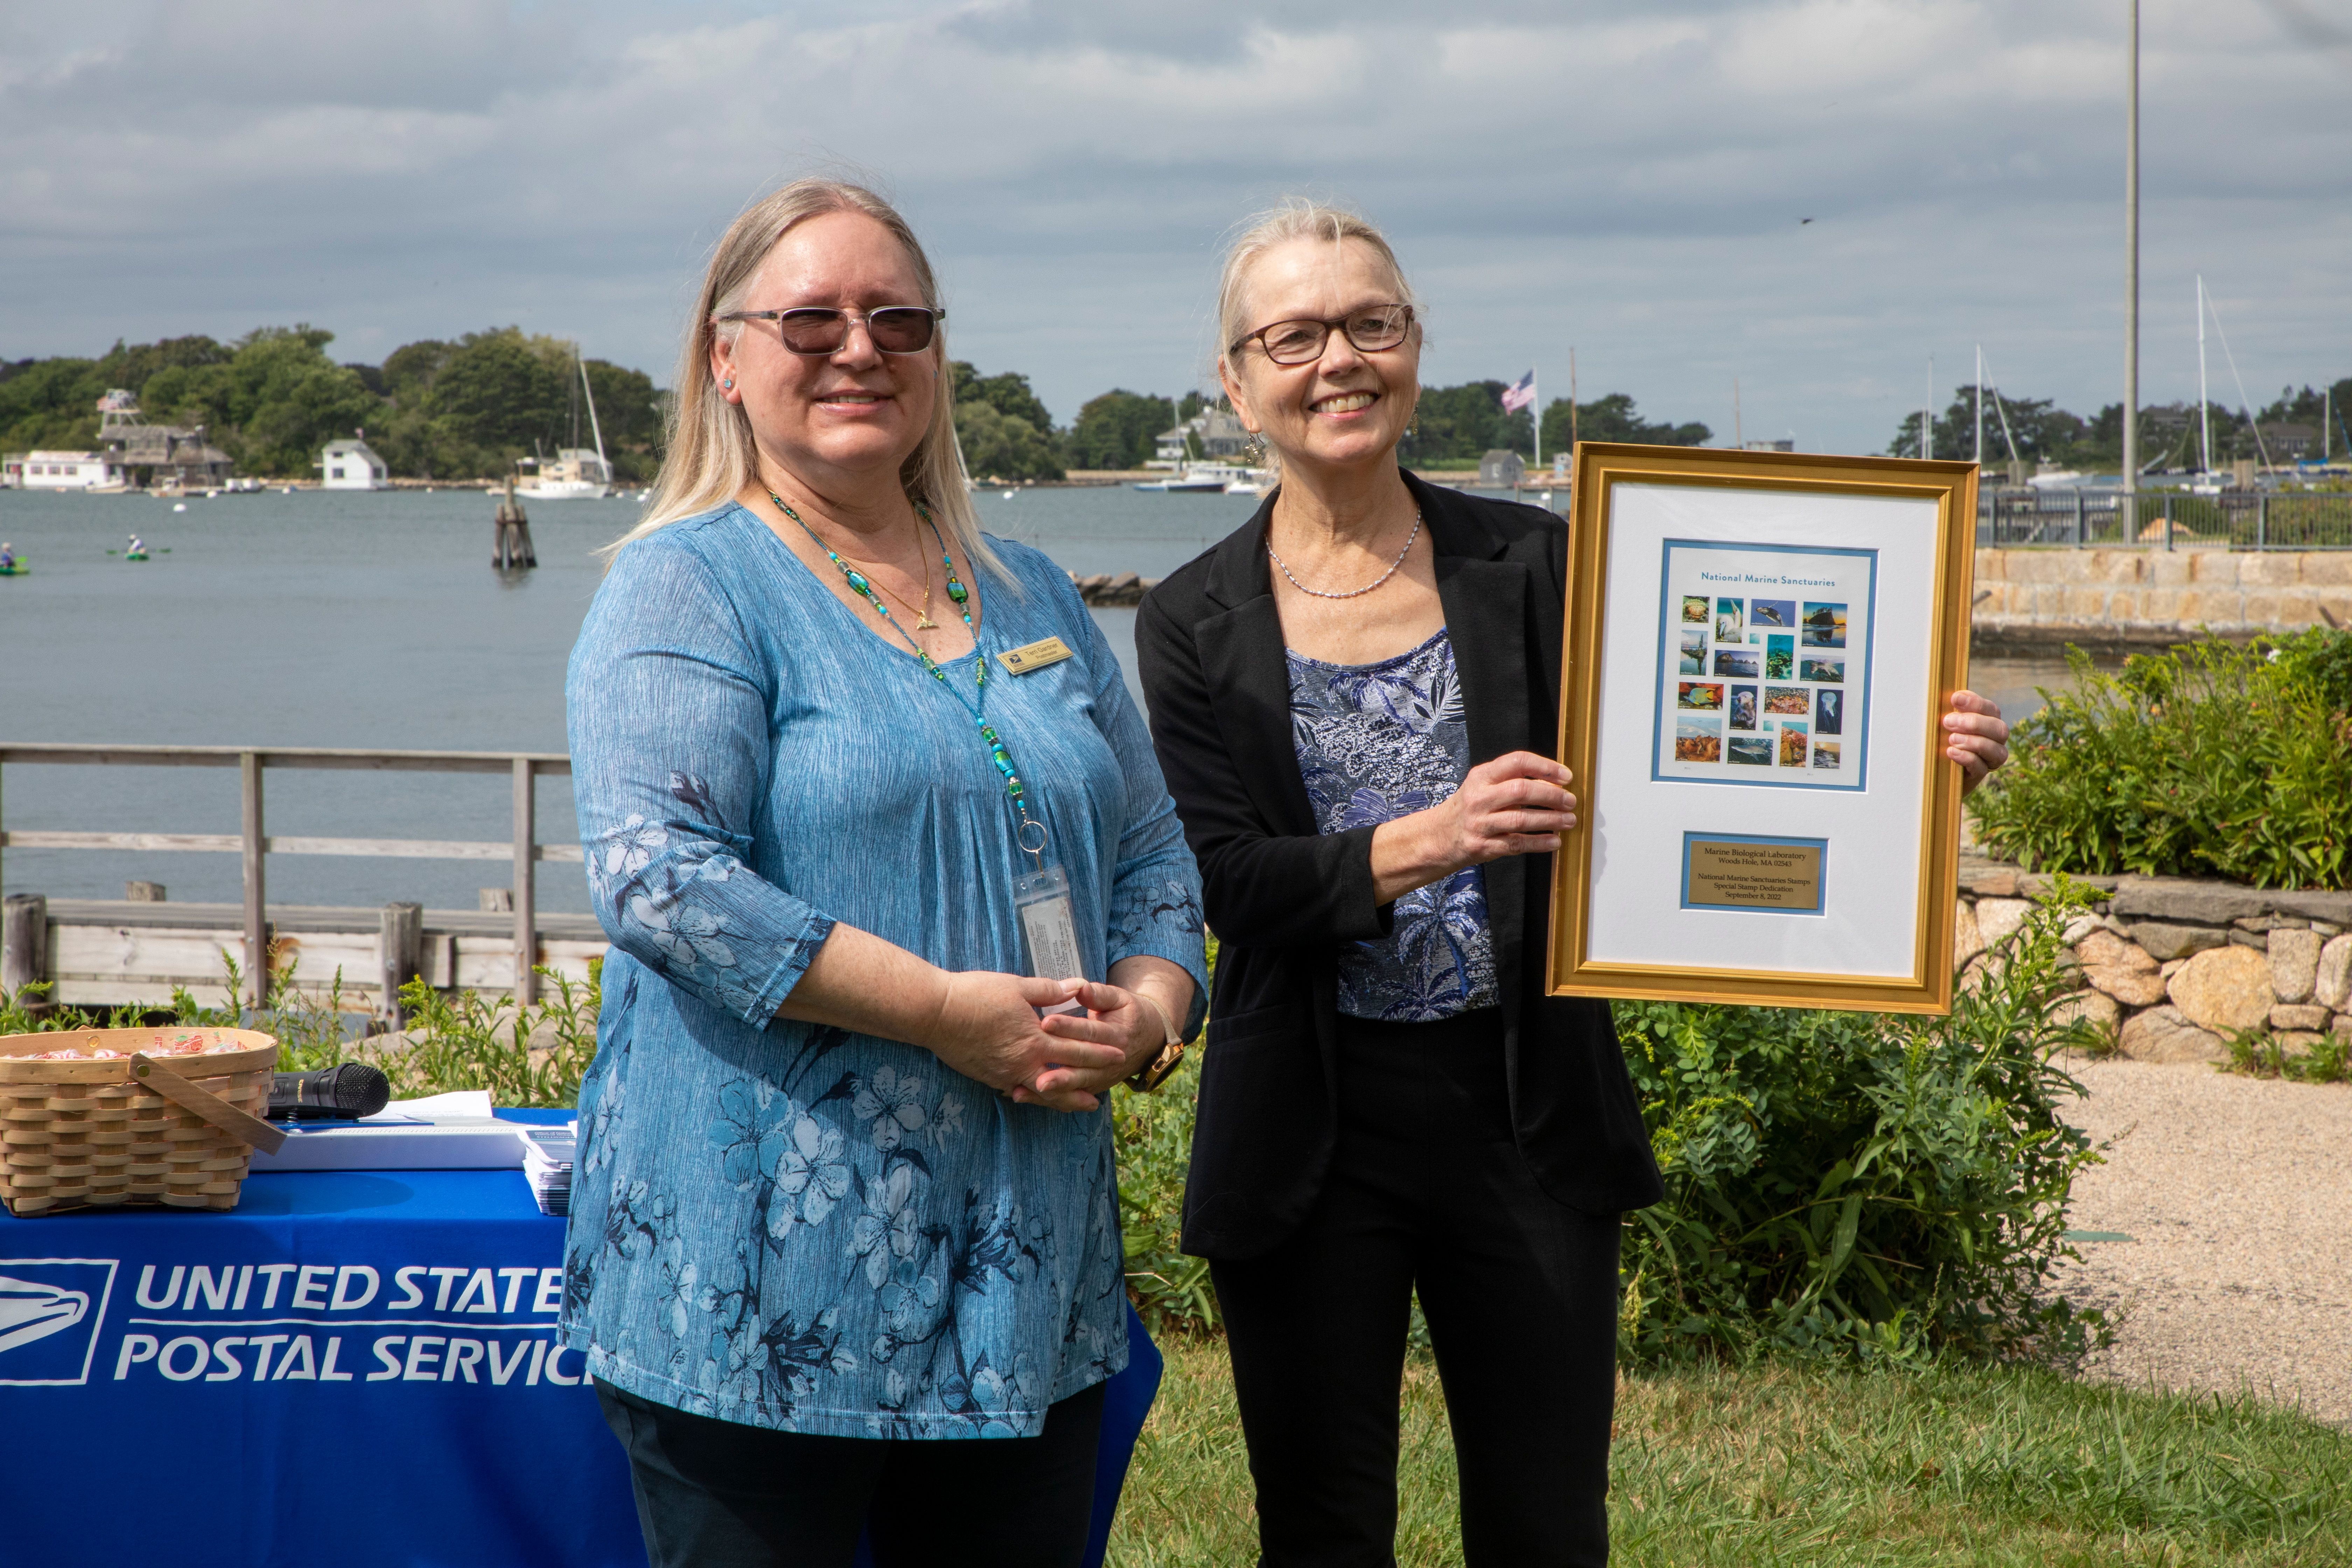 Sylvester stands with Theresa Gardner, West Falmouth Postmaster, and holds a print of the National Marine Sanctuary forever stamps. Credit: © Woods Hole Oceanographic Institution